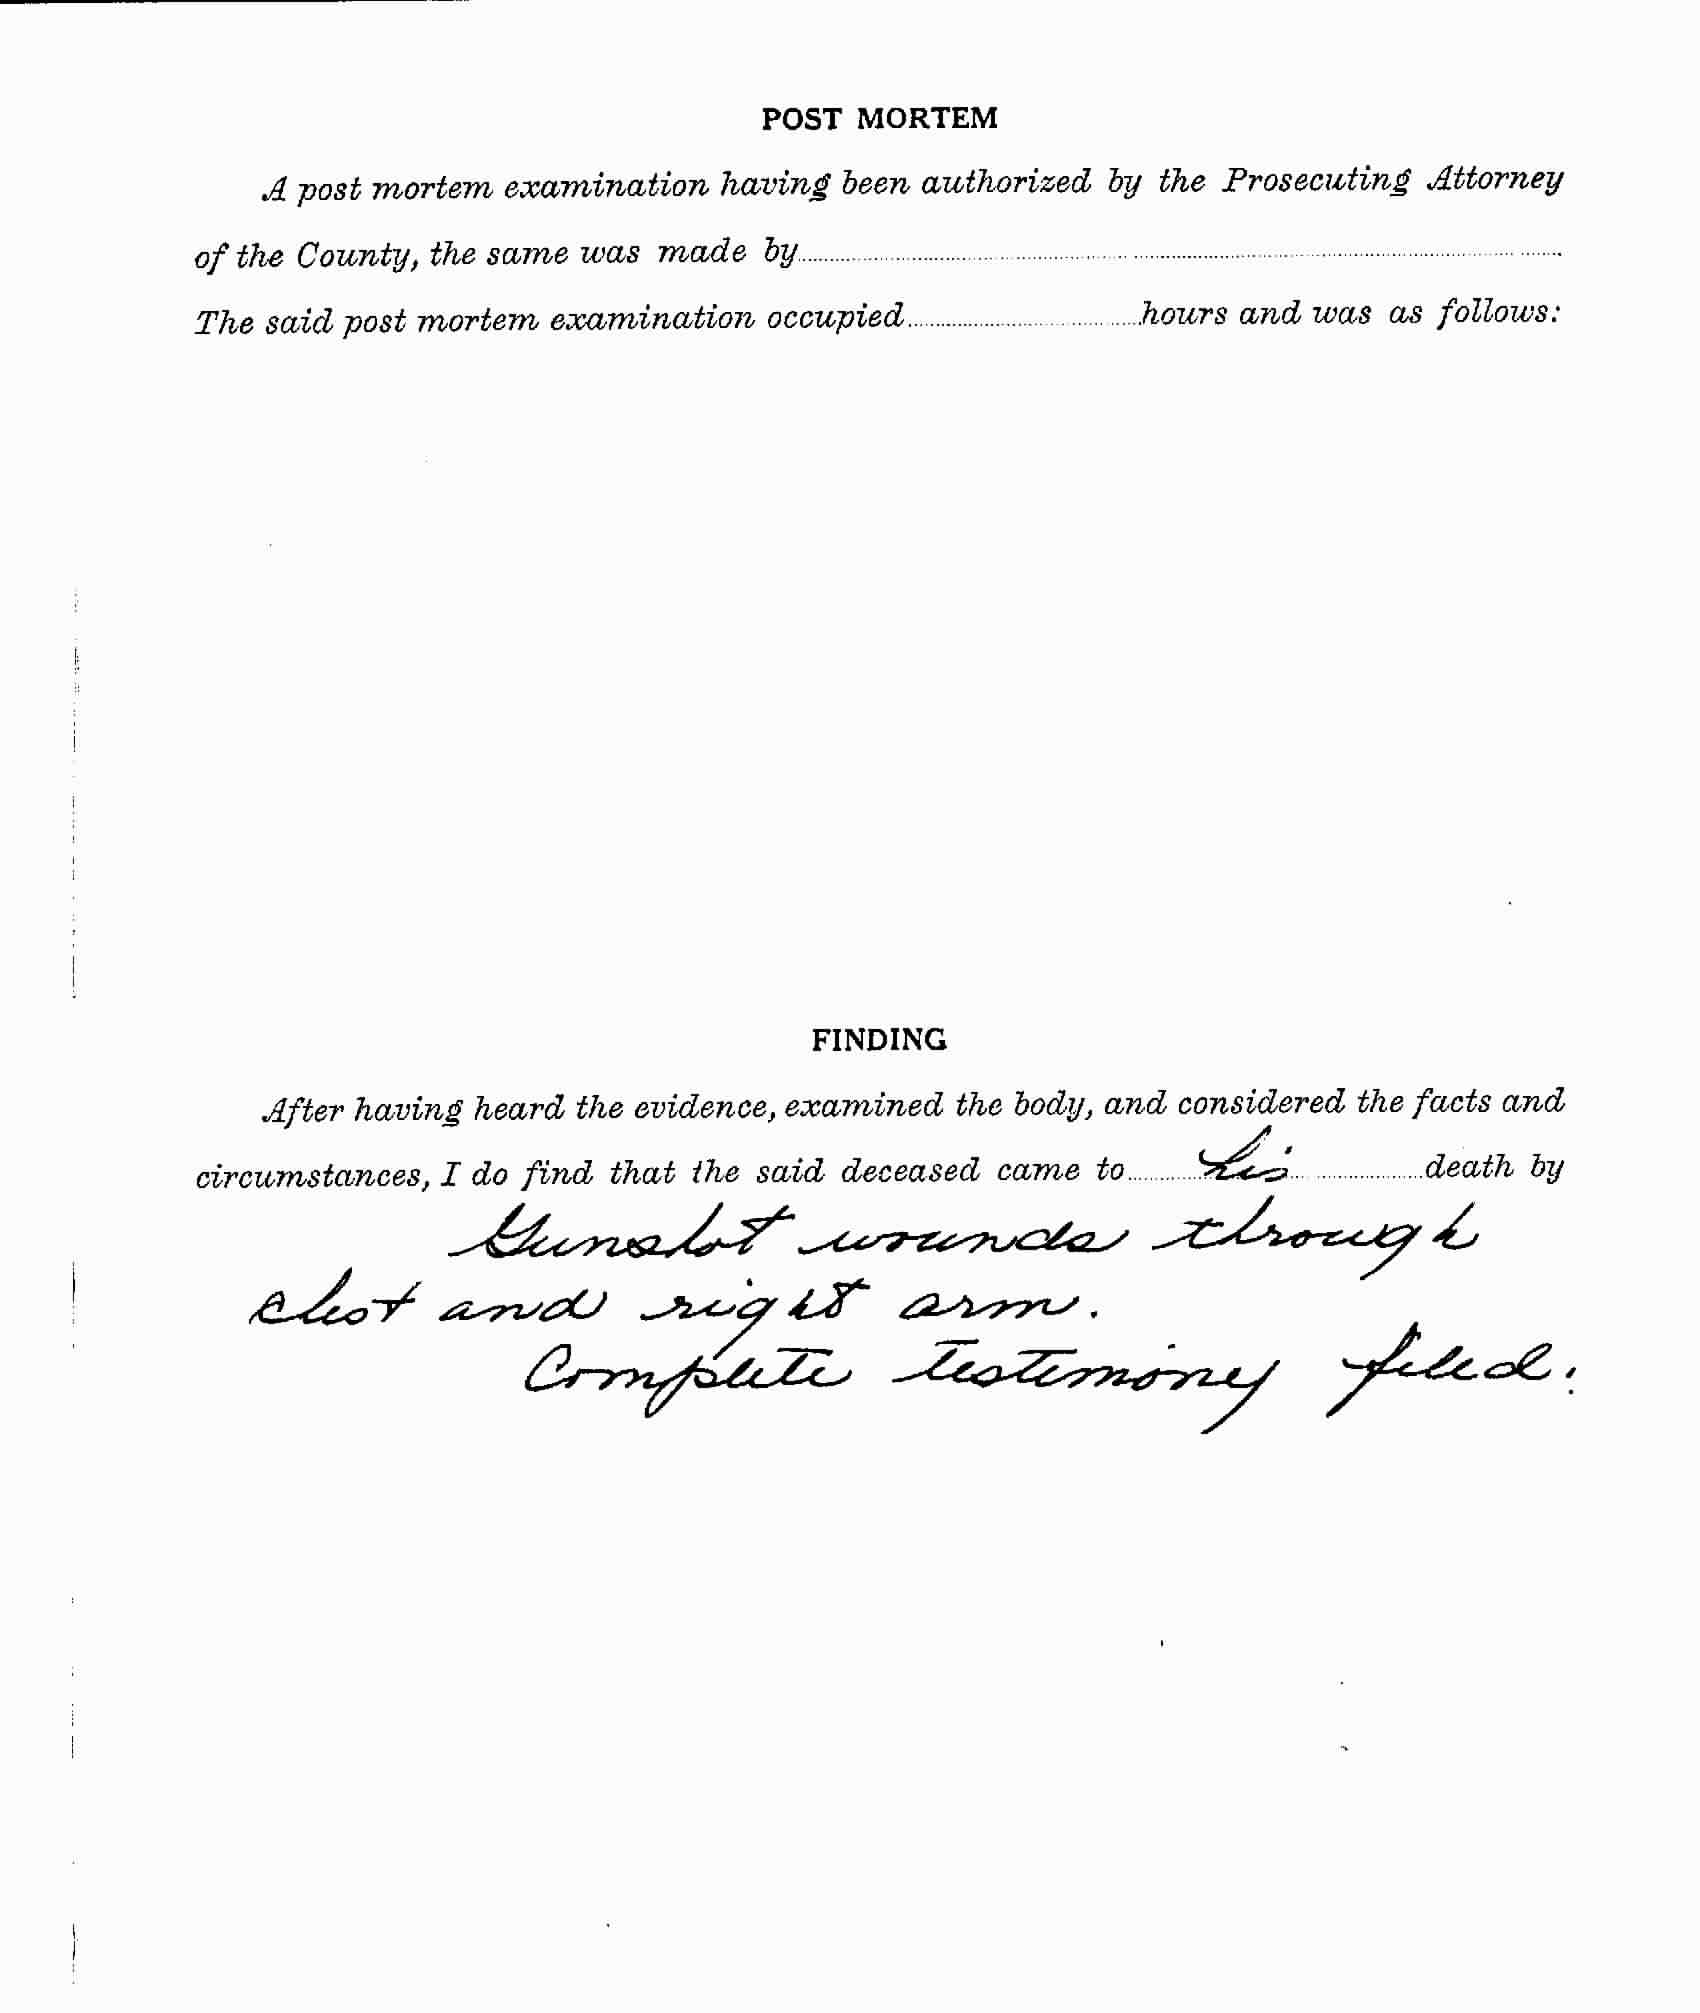 Page 4 of the Coroner's report